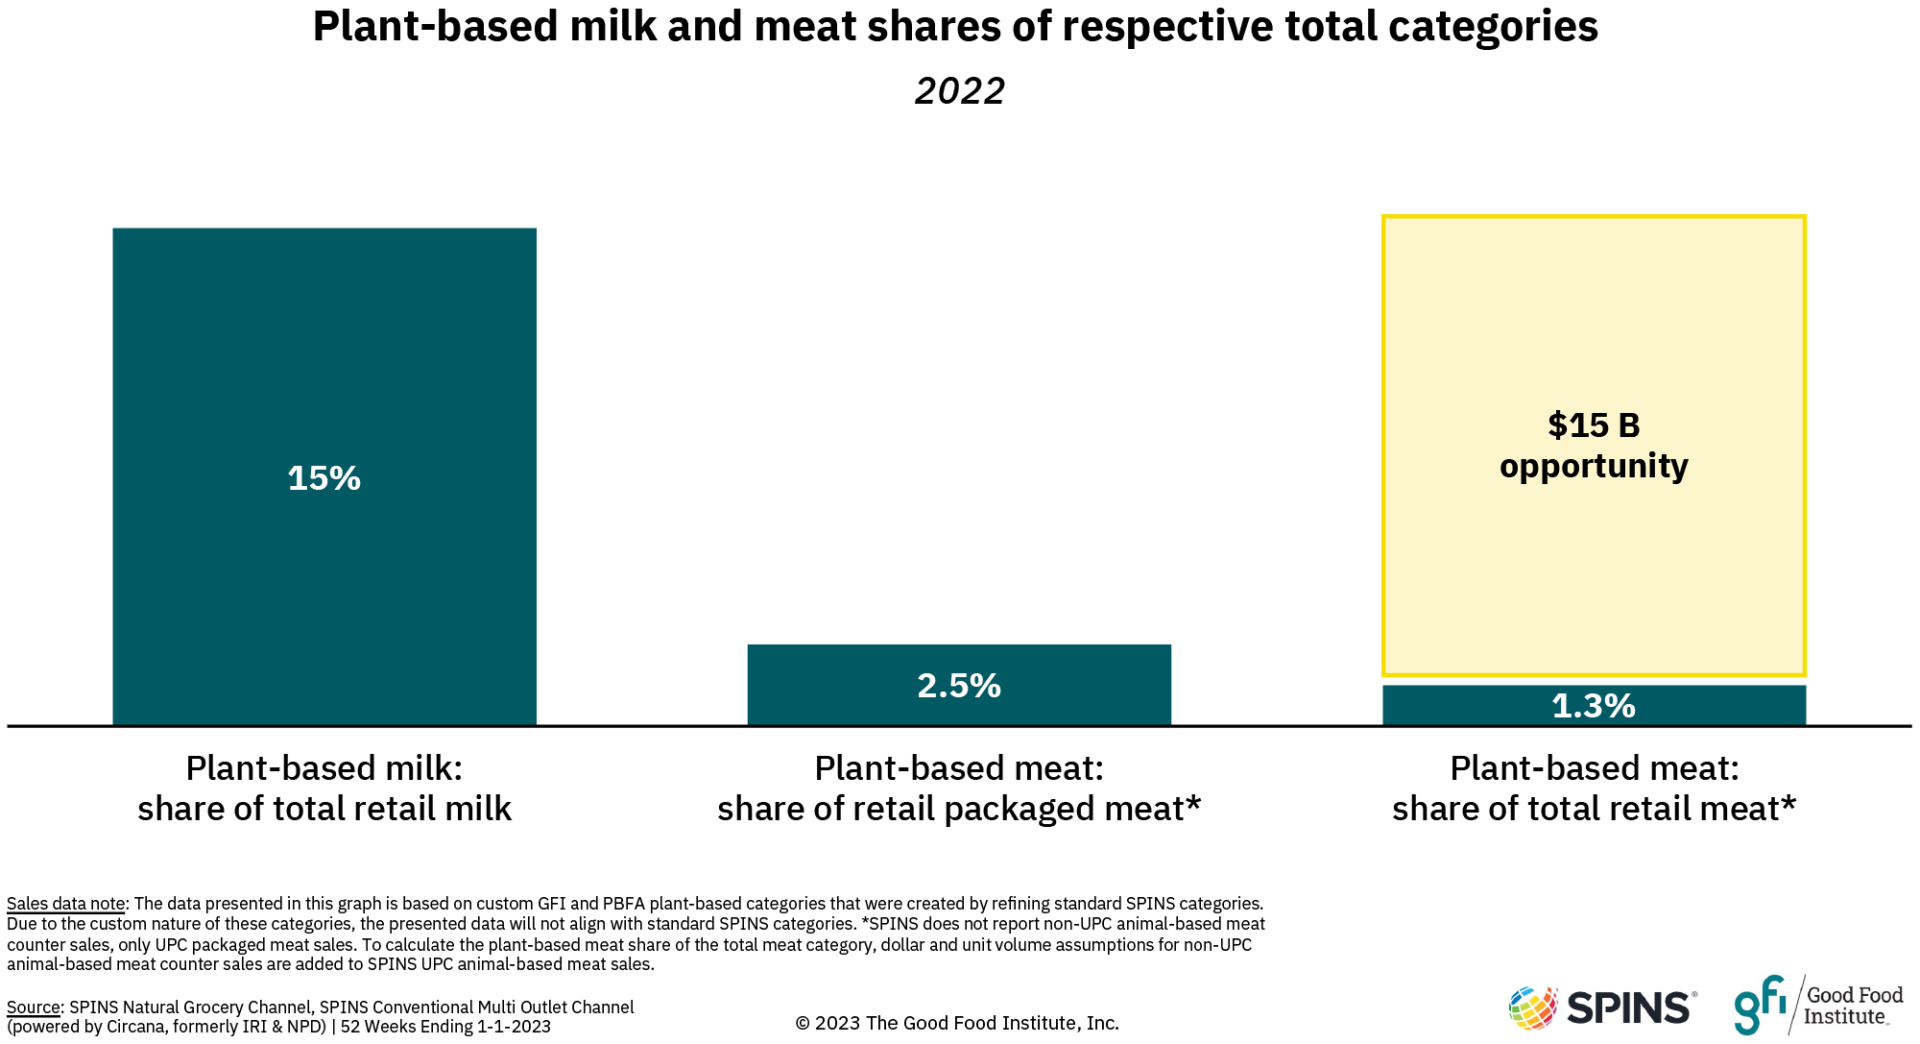 Plant-based milk and meat shares of total categories